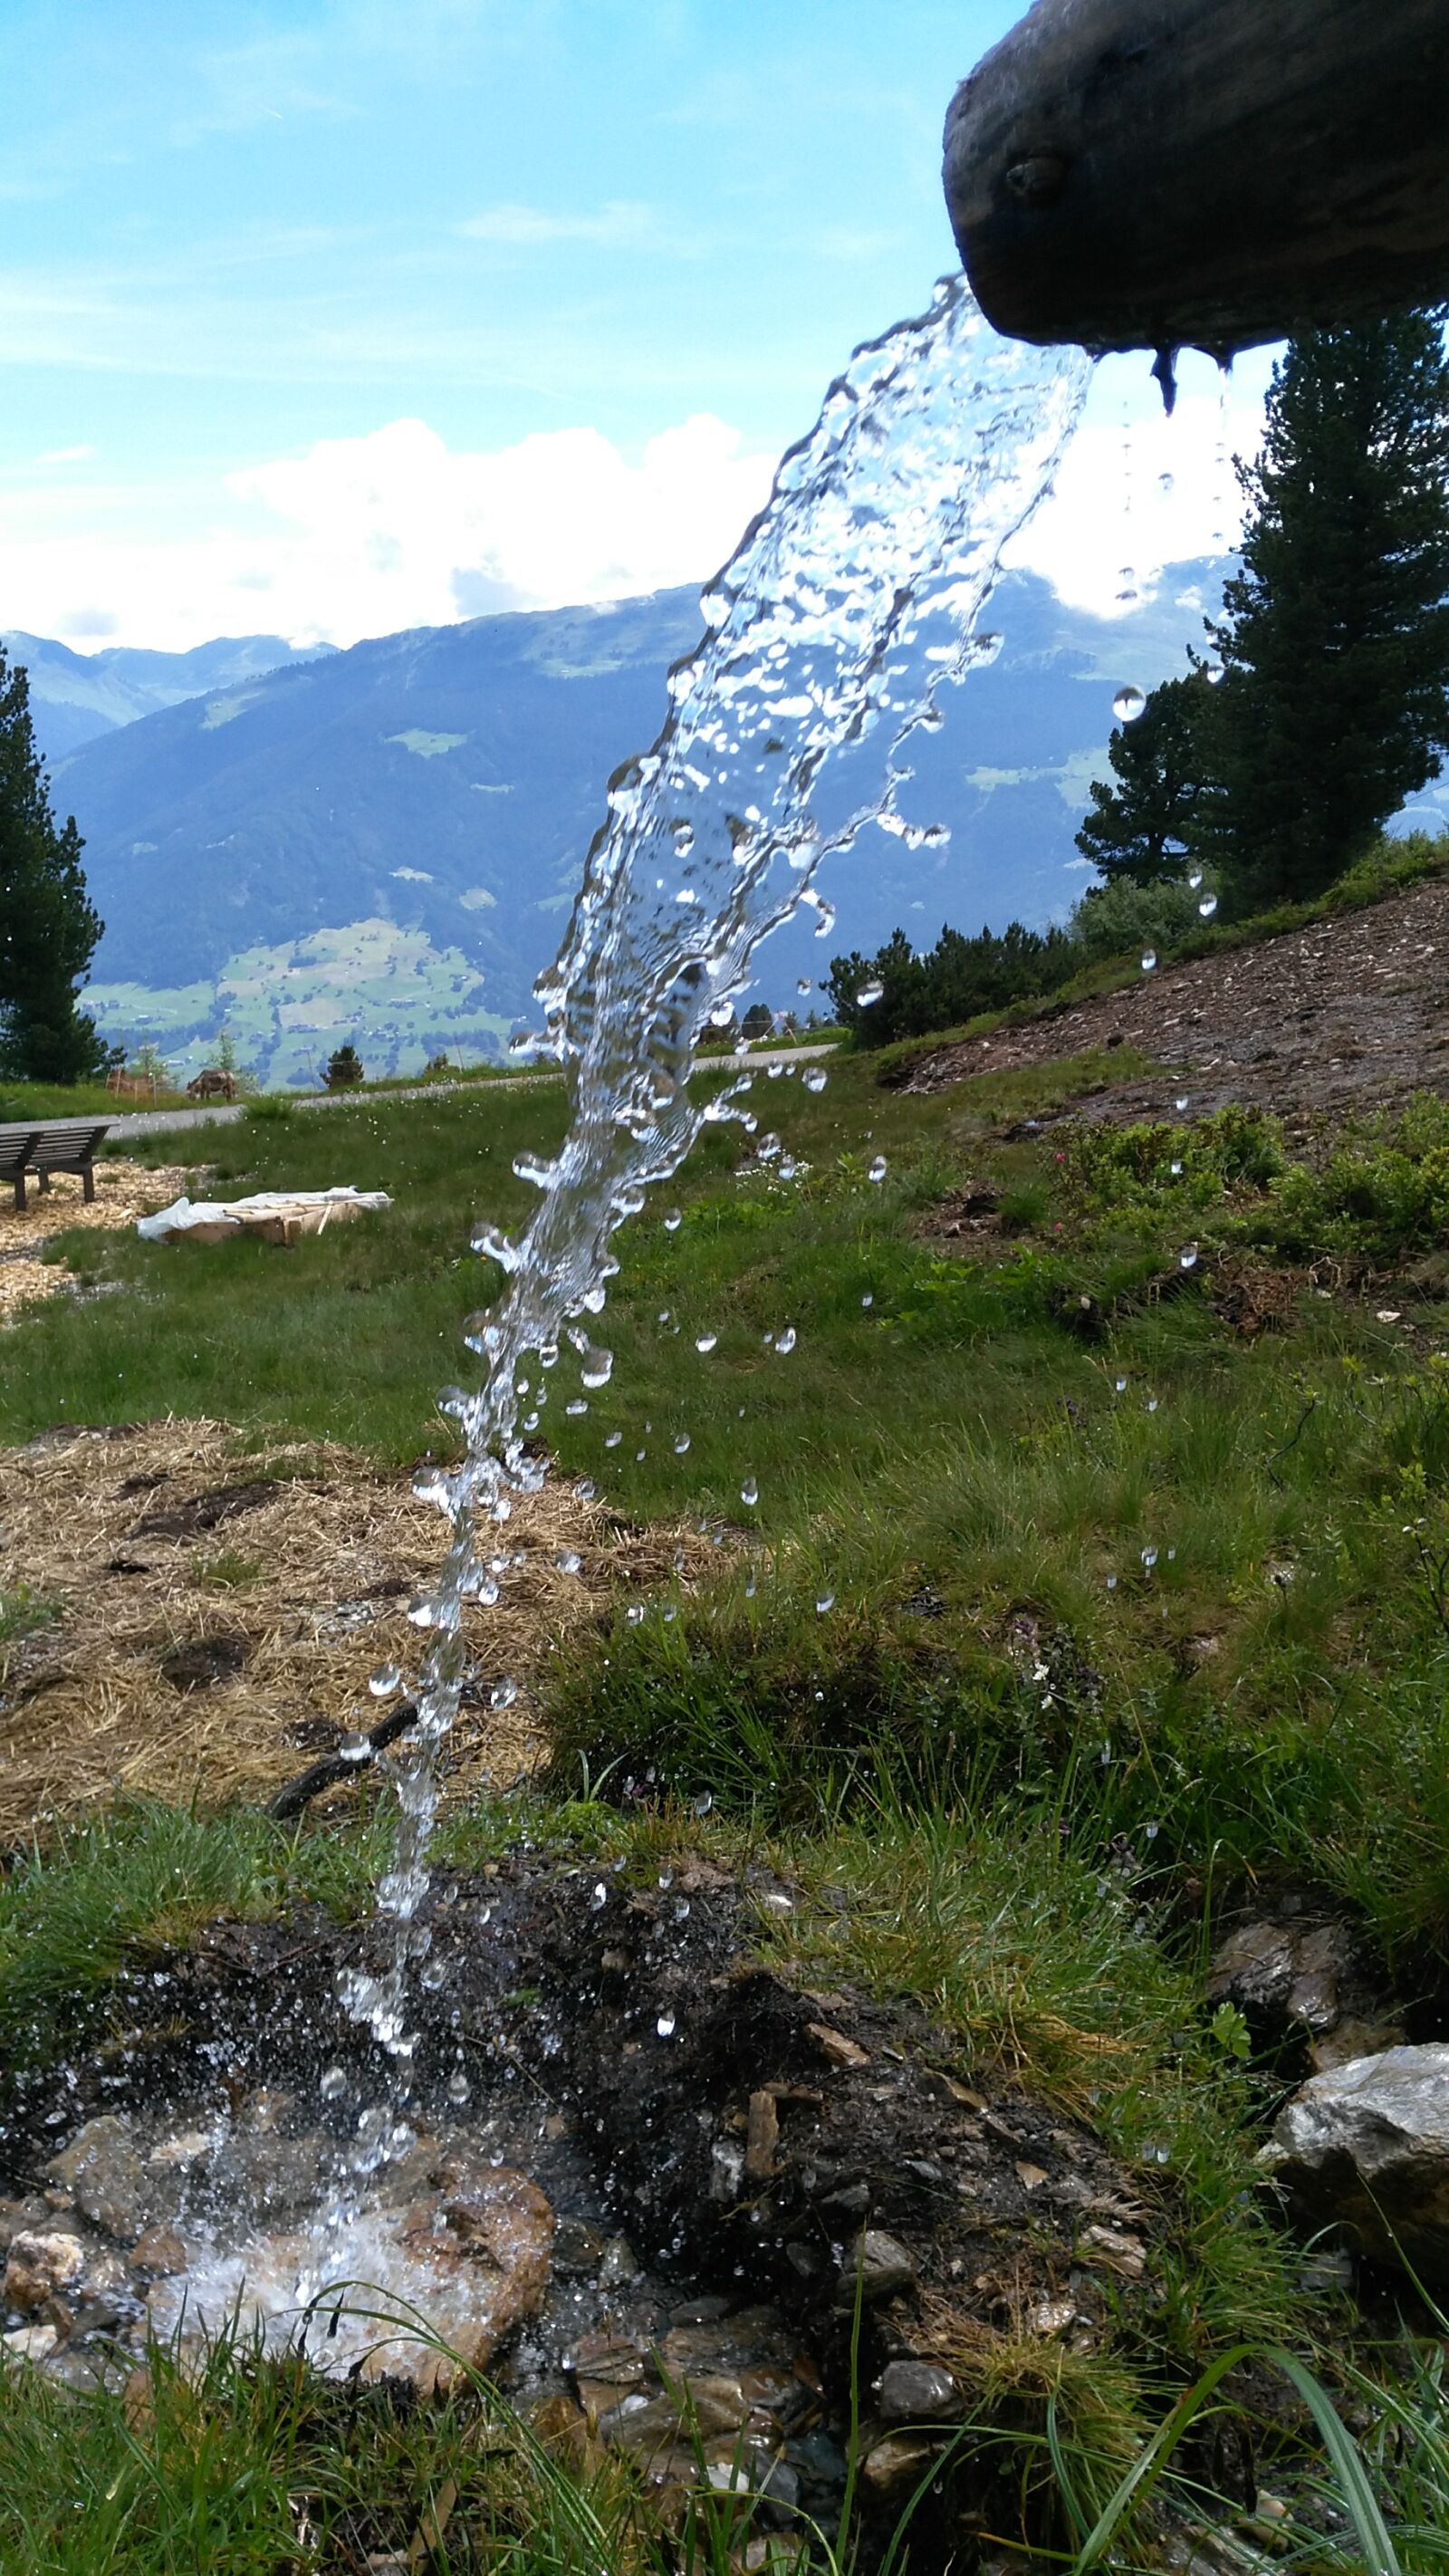 HUAWEI G7-L01 sample photo. Alpine, water, nature photography